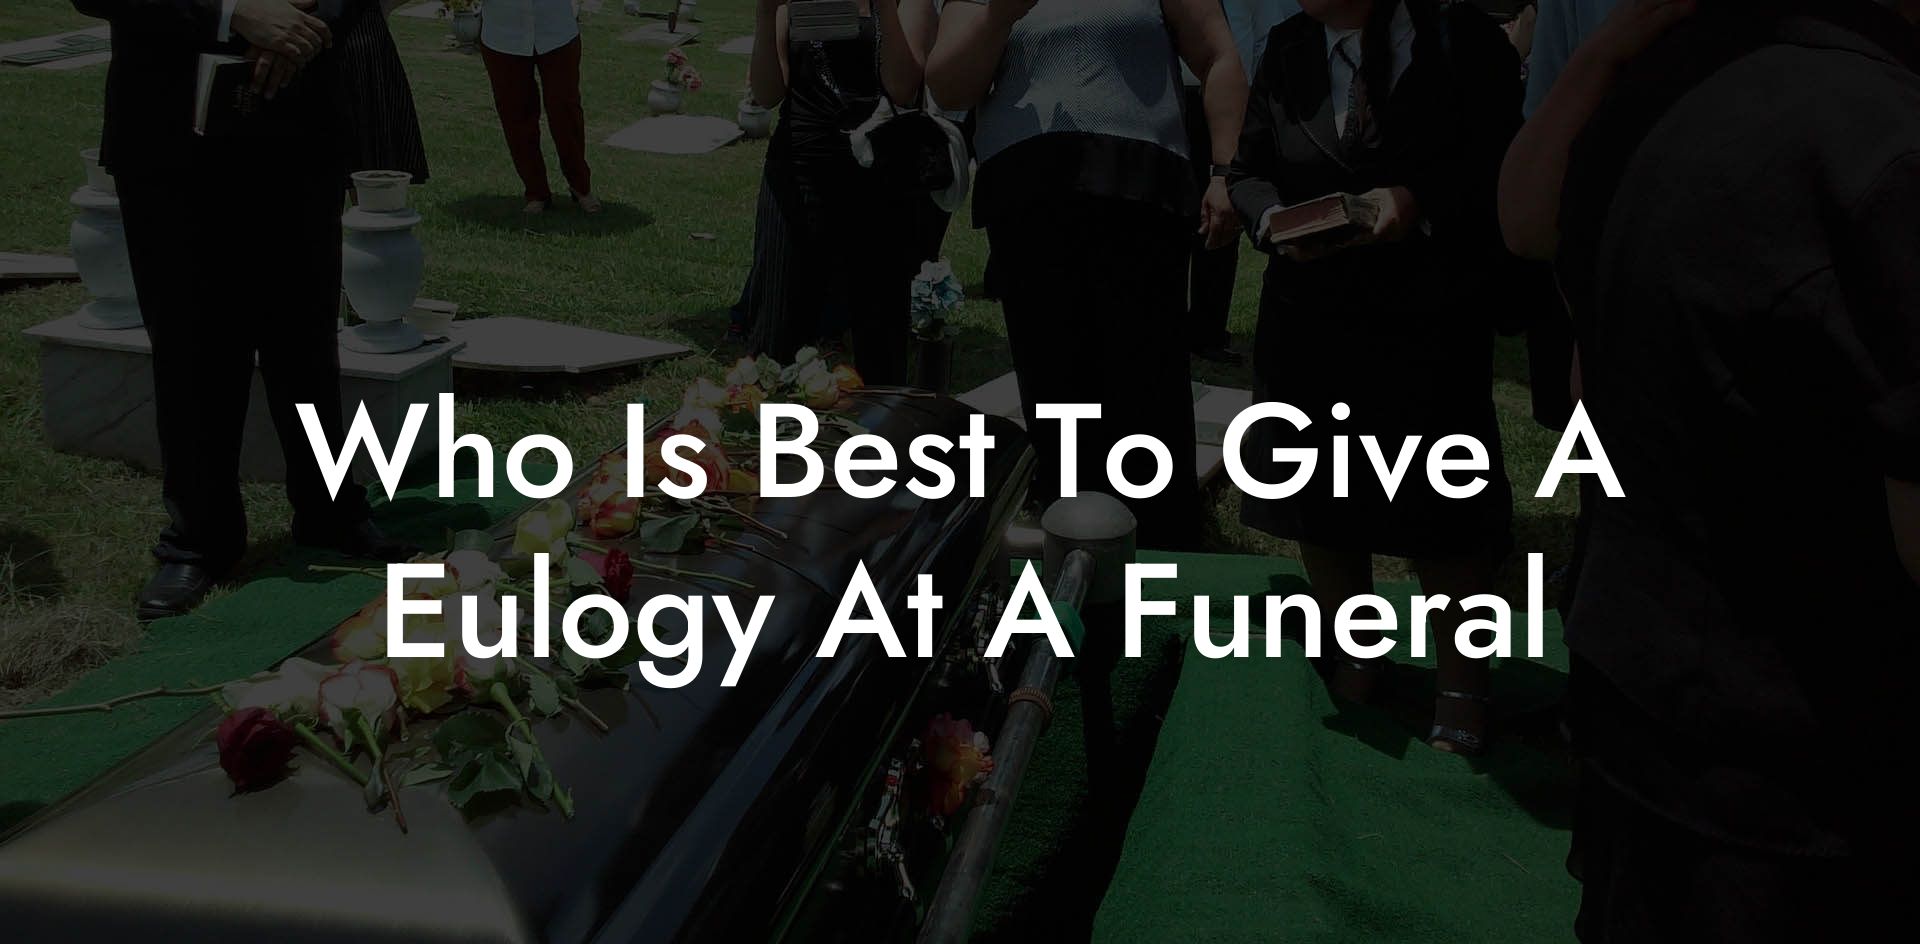 Who Is Best To Give A Eulogy At A Funeral